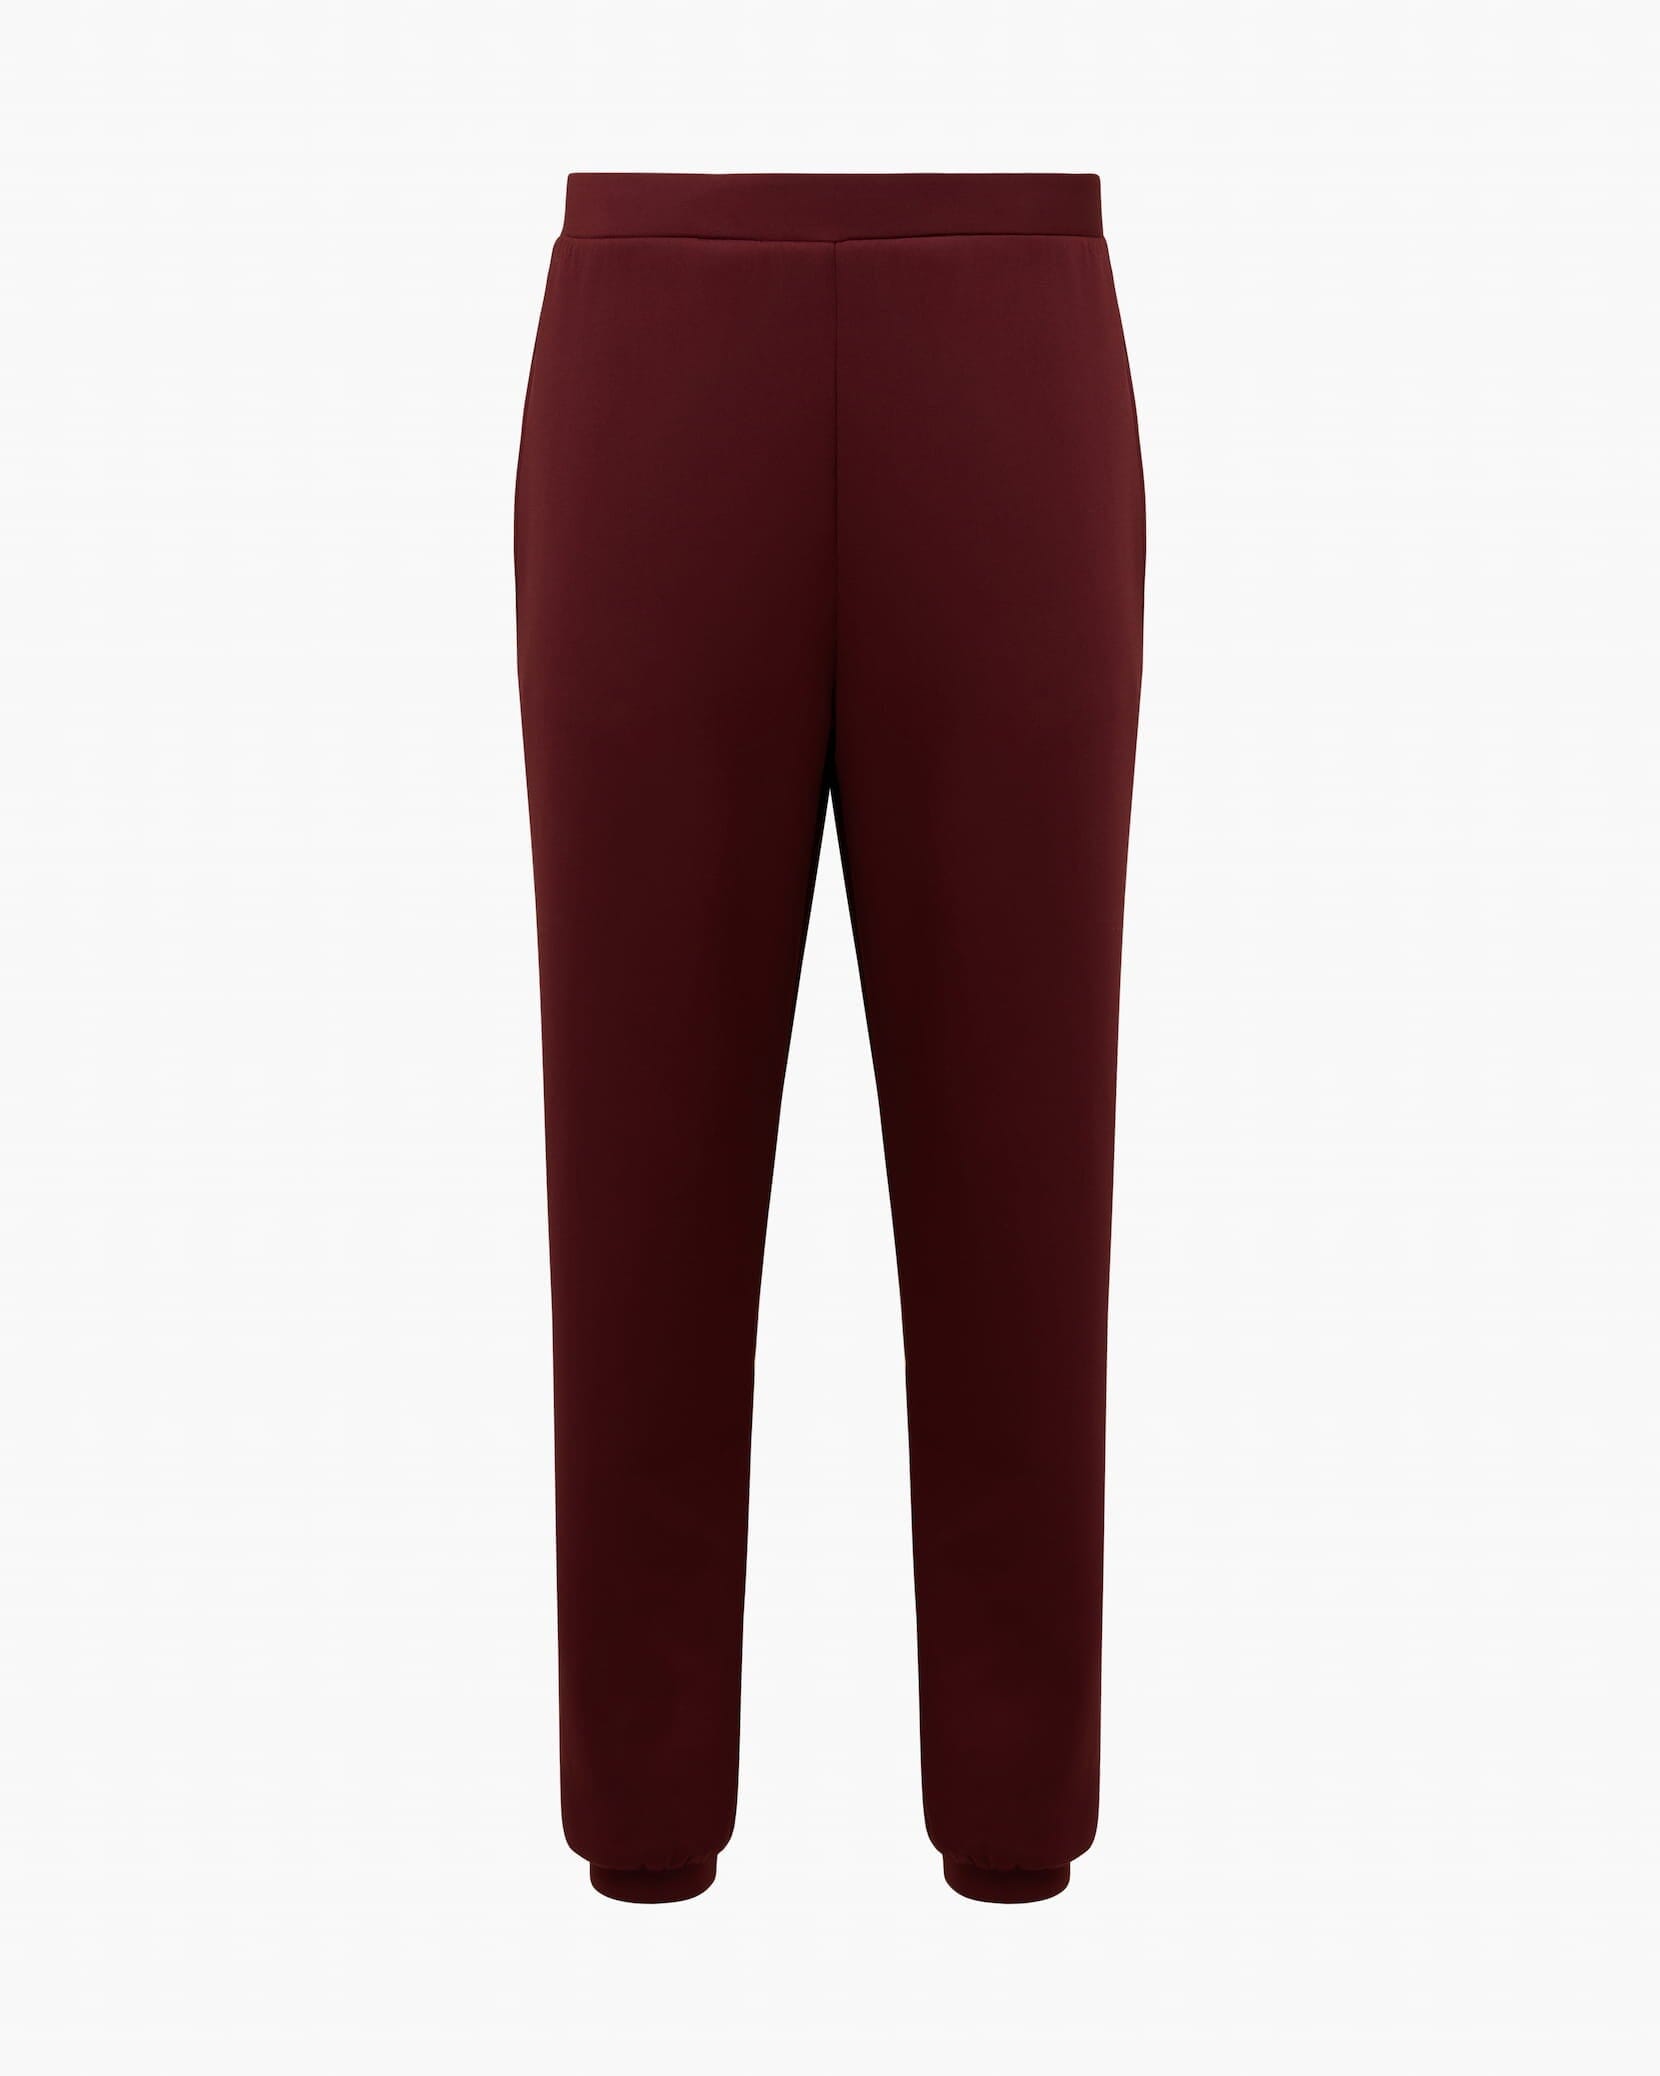 BLACK MANNEQUIN - Red Classic Joggers – The Black Mannequin